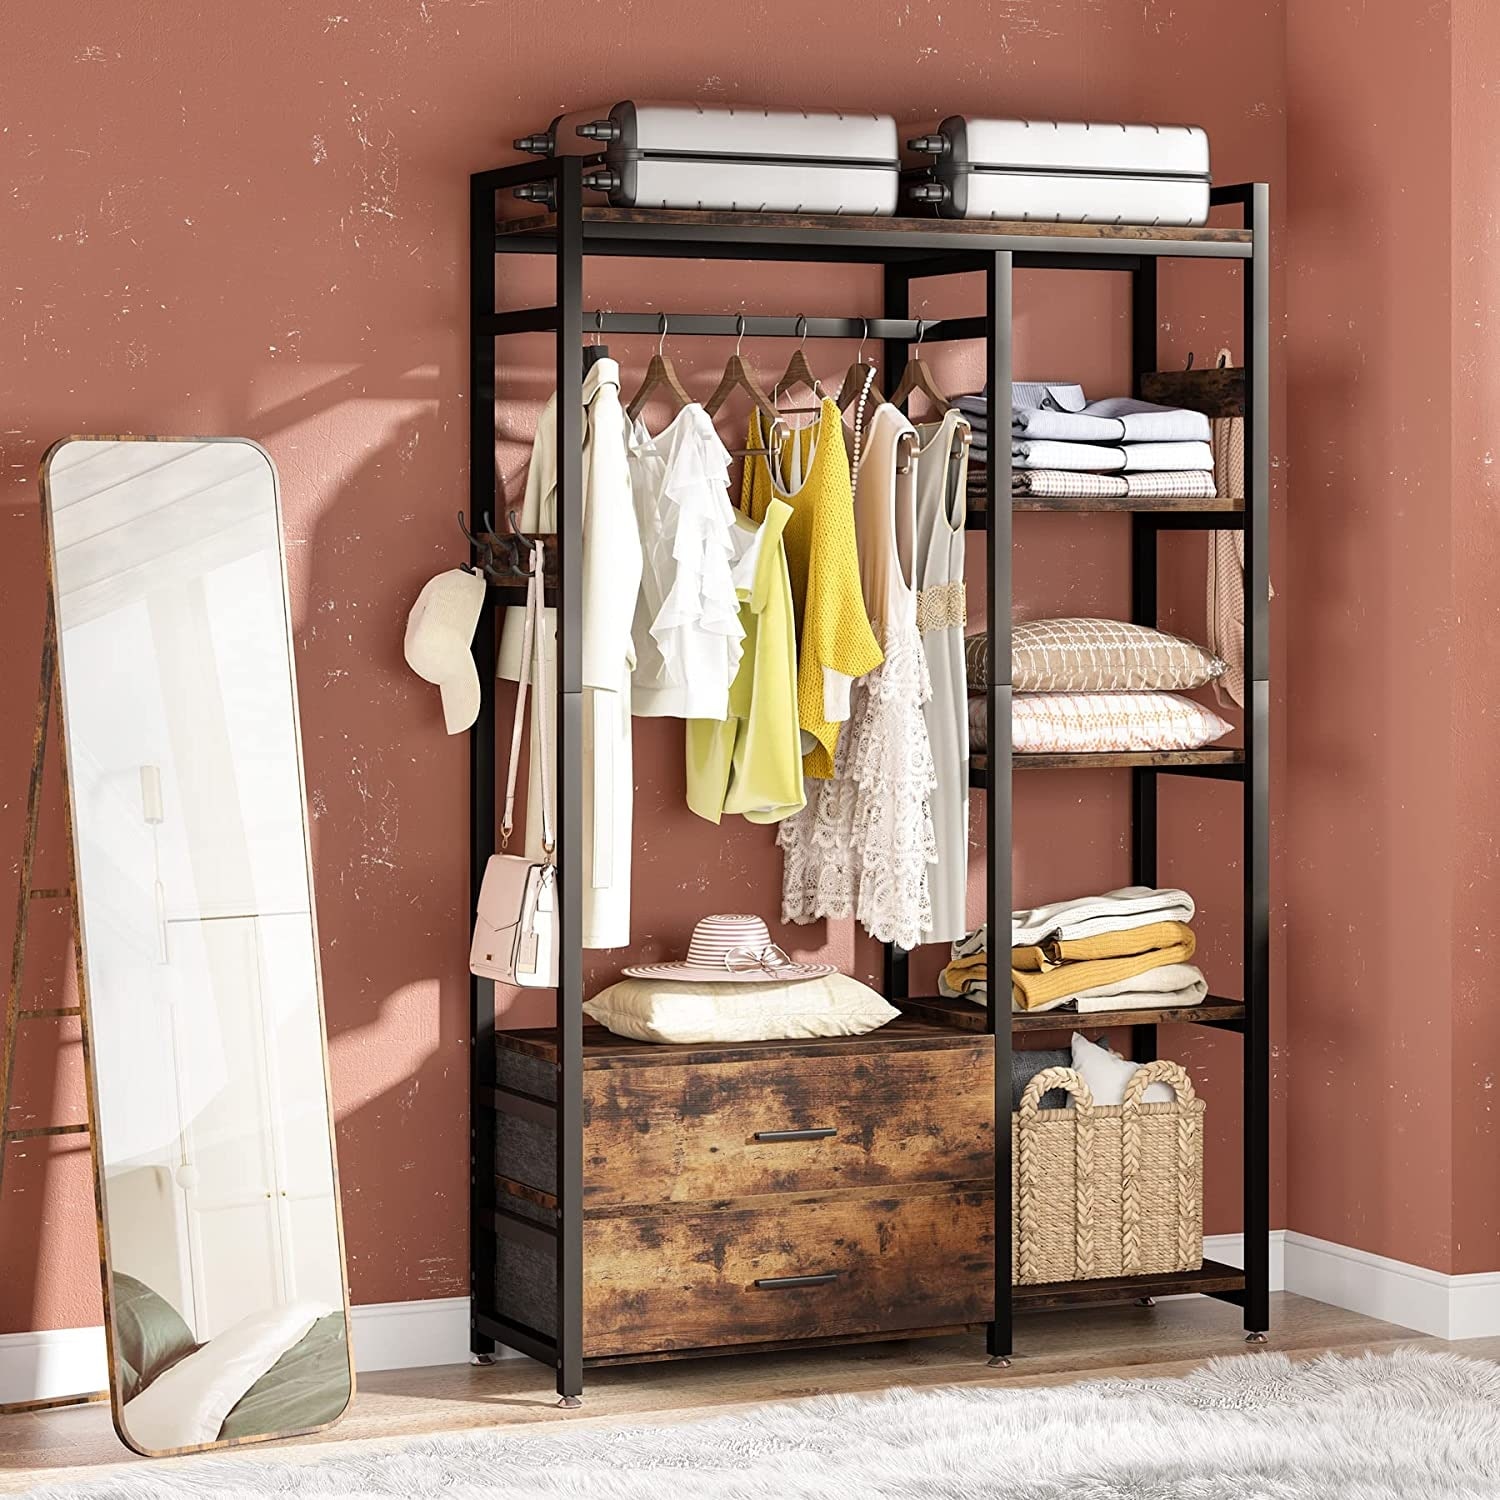 https://ak1.ostkcdn.com/images/products/is/images/direct/f97dd9741d07d744f96d675e7646779af93b8bcb/Freestanding-Closet-Organizer%2C-Clothes-Rack-with-Drawers%2C-Heavy-Duty-Garment-Rack-Hanging-Clothing--Brown.jpg